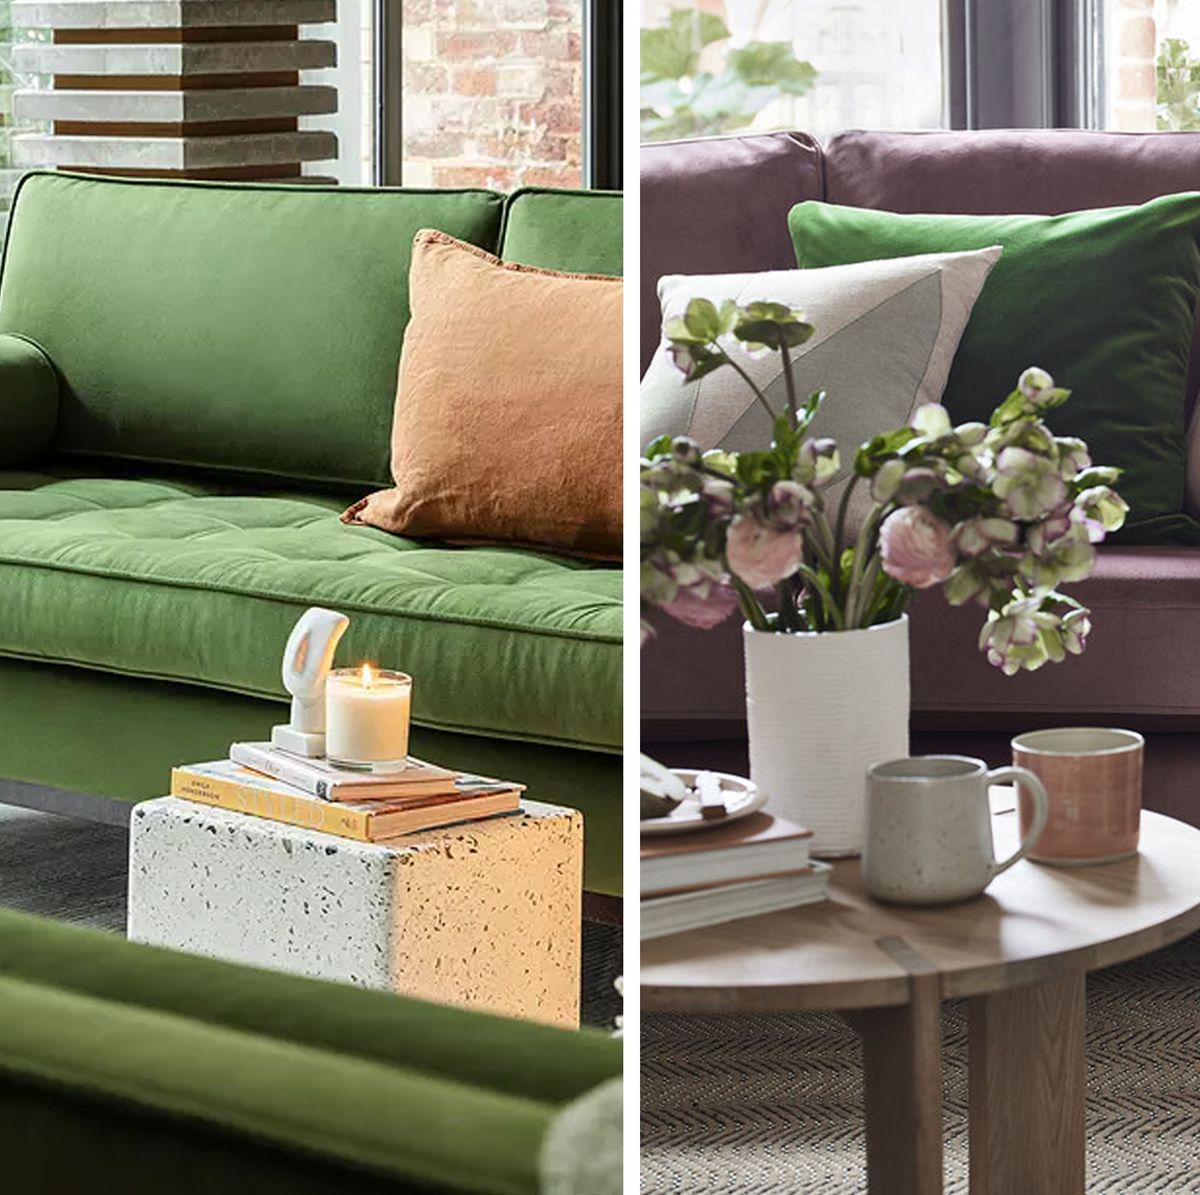 12 Most Popular Sofa Colours In 2023 - The Best Sofa Colour